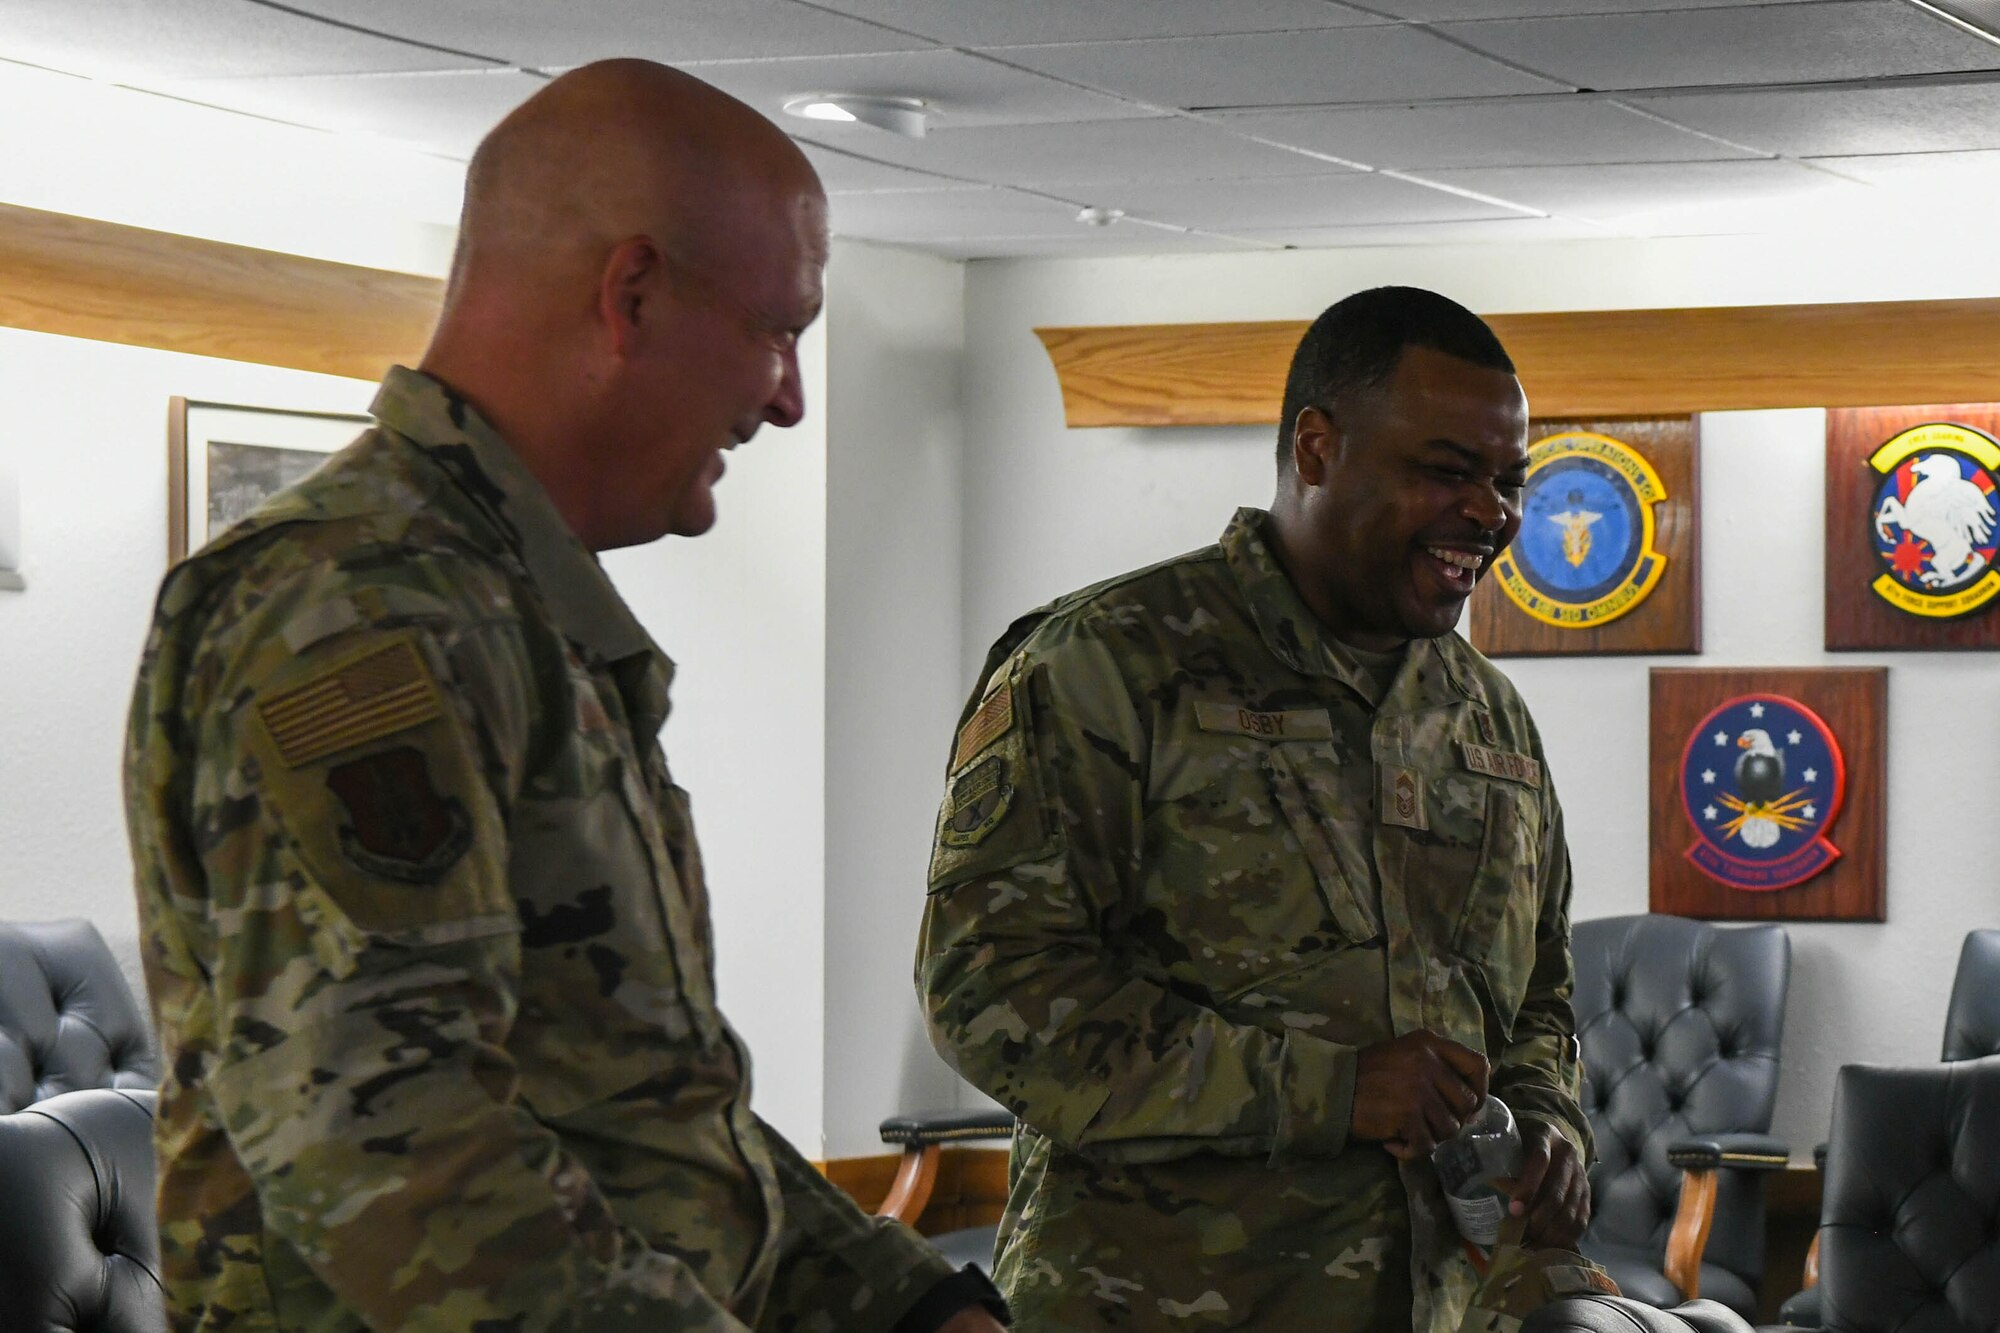 Col. Blaine Baker (left), 97th Air Mobility Wing (AMW) commander, and Chief Master Sgt. Kevin Osby, senior enlisted advisor for the Army and Air Force Exchange Service, laugh together while at Altus Air Force Base, Oklahoma, August 3, 2022. During his visit, Osby was shown the 97th AMW mission brief and had an open discussion with base leaders. (U.S. Air Force photo by Airman 1st Class Trenton Jancze)